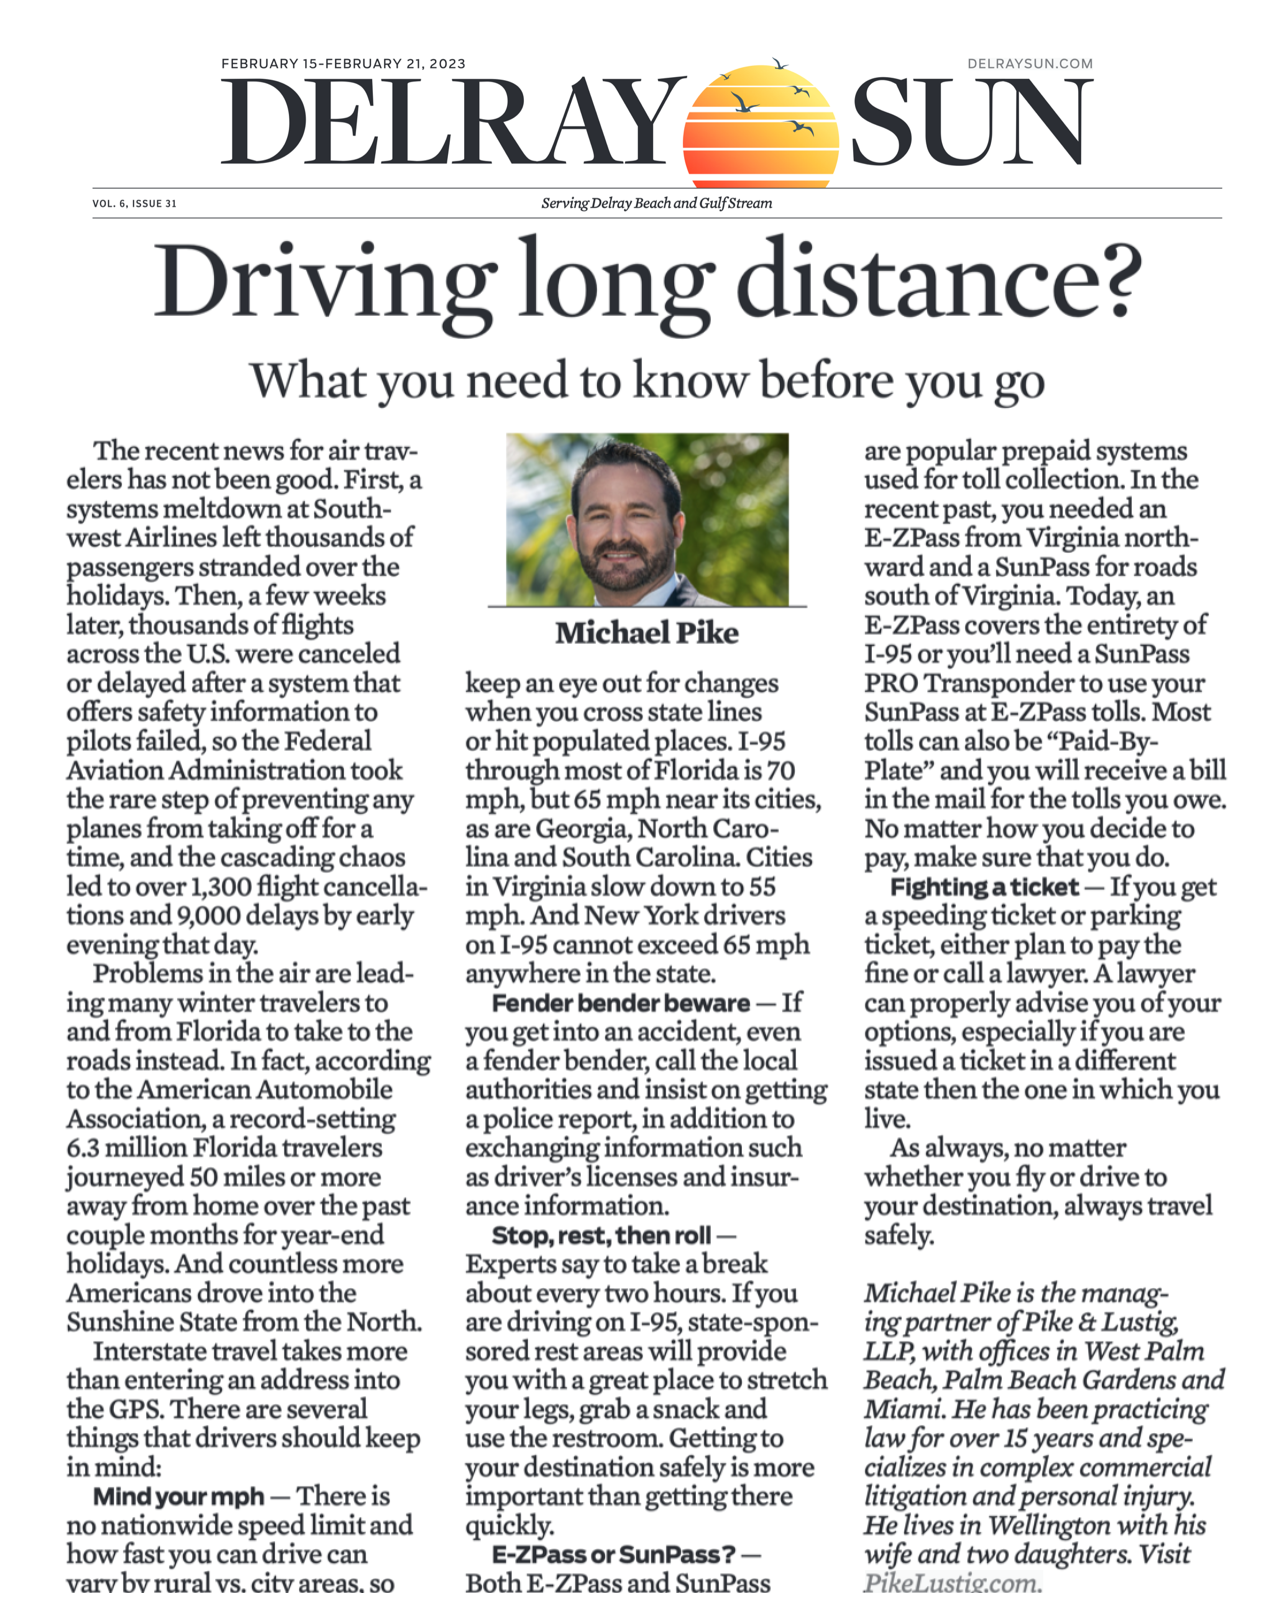 What to Know When Driving Long Distance